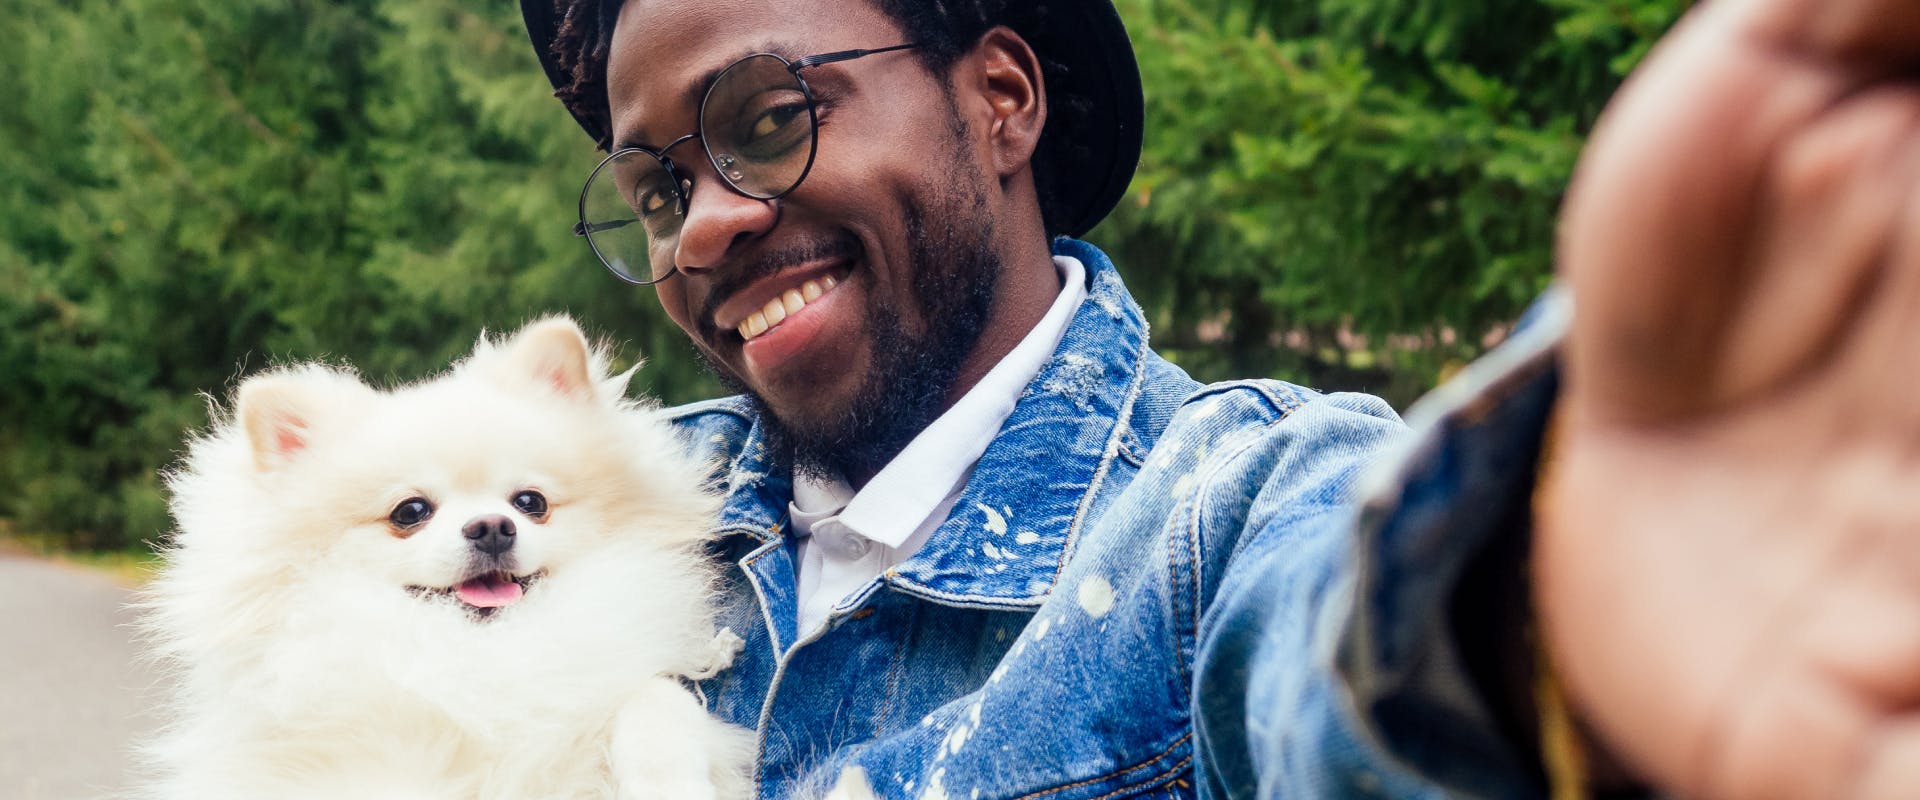 A man takes a selfie with his dog.